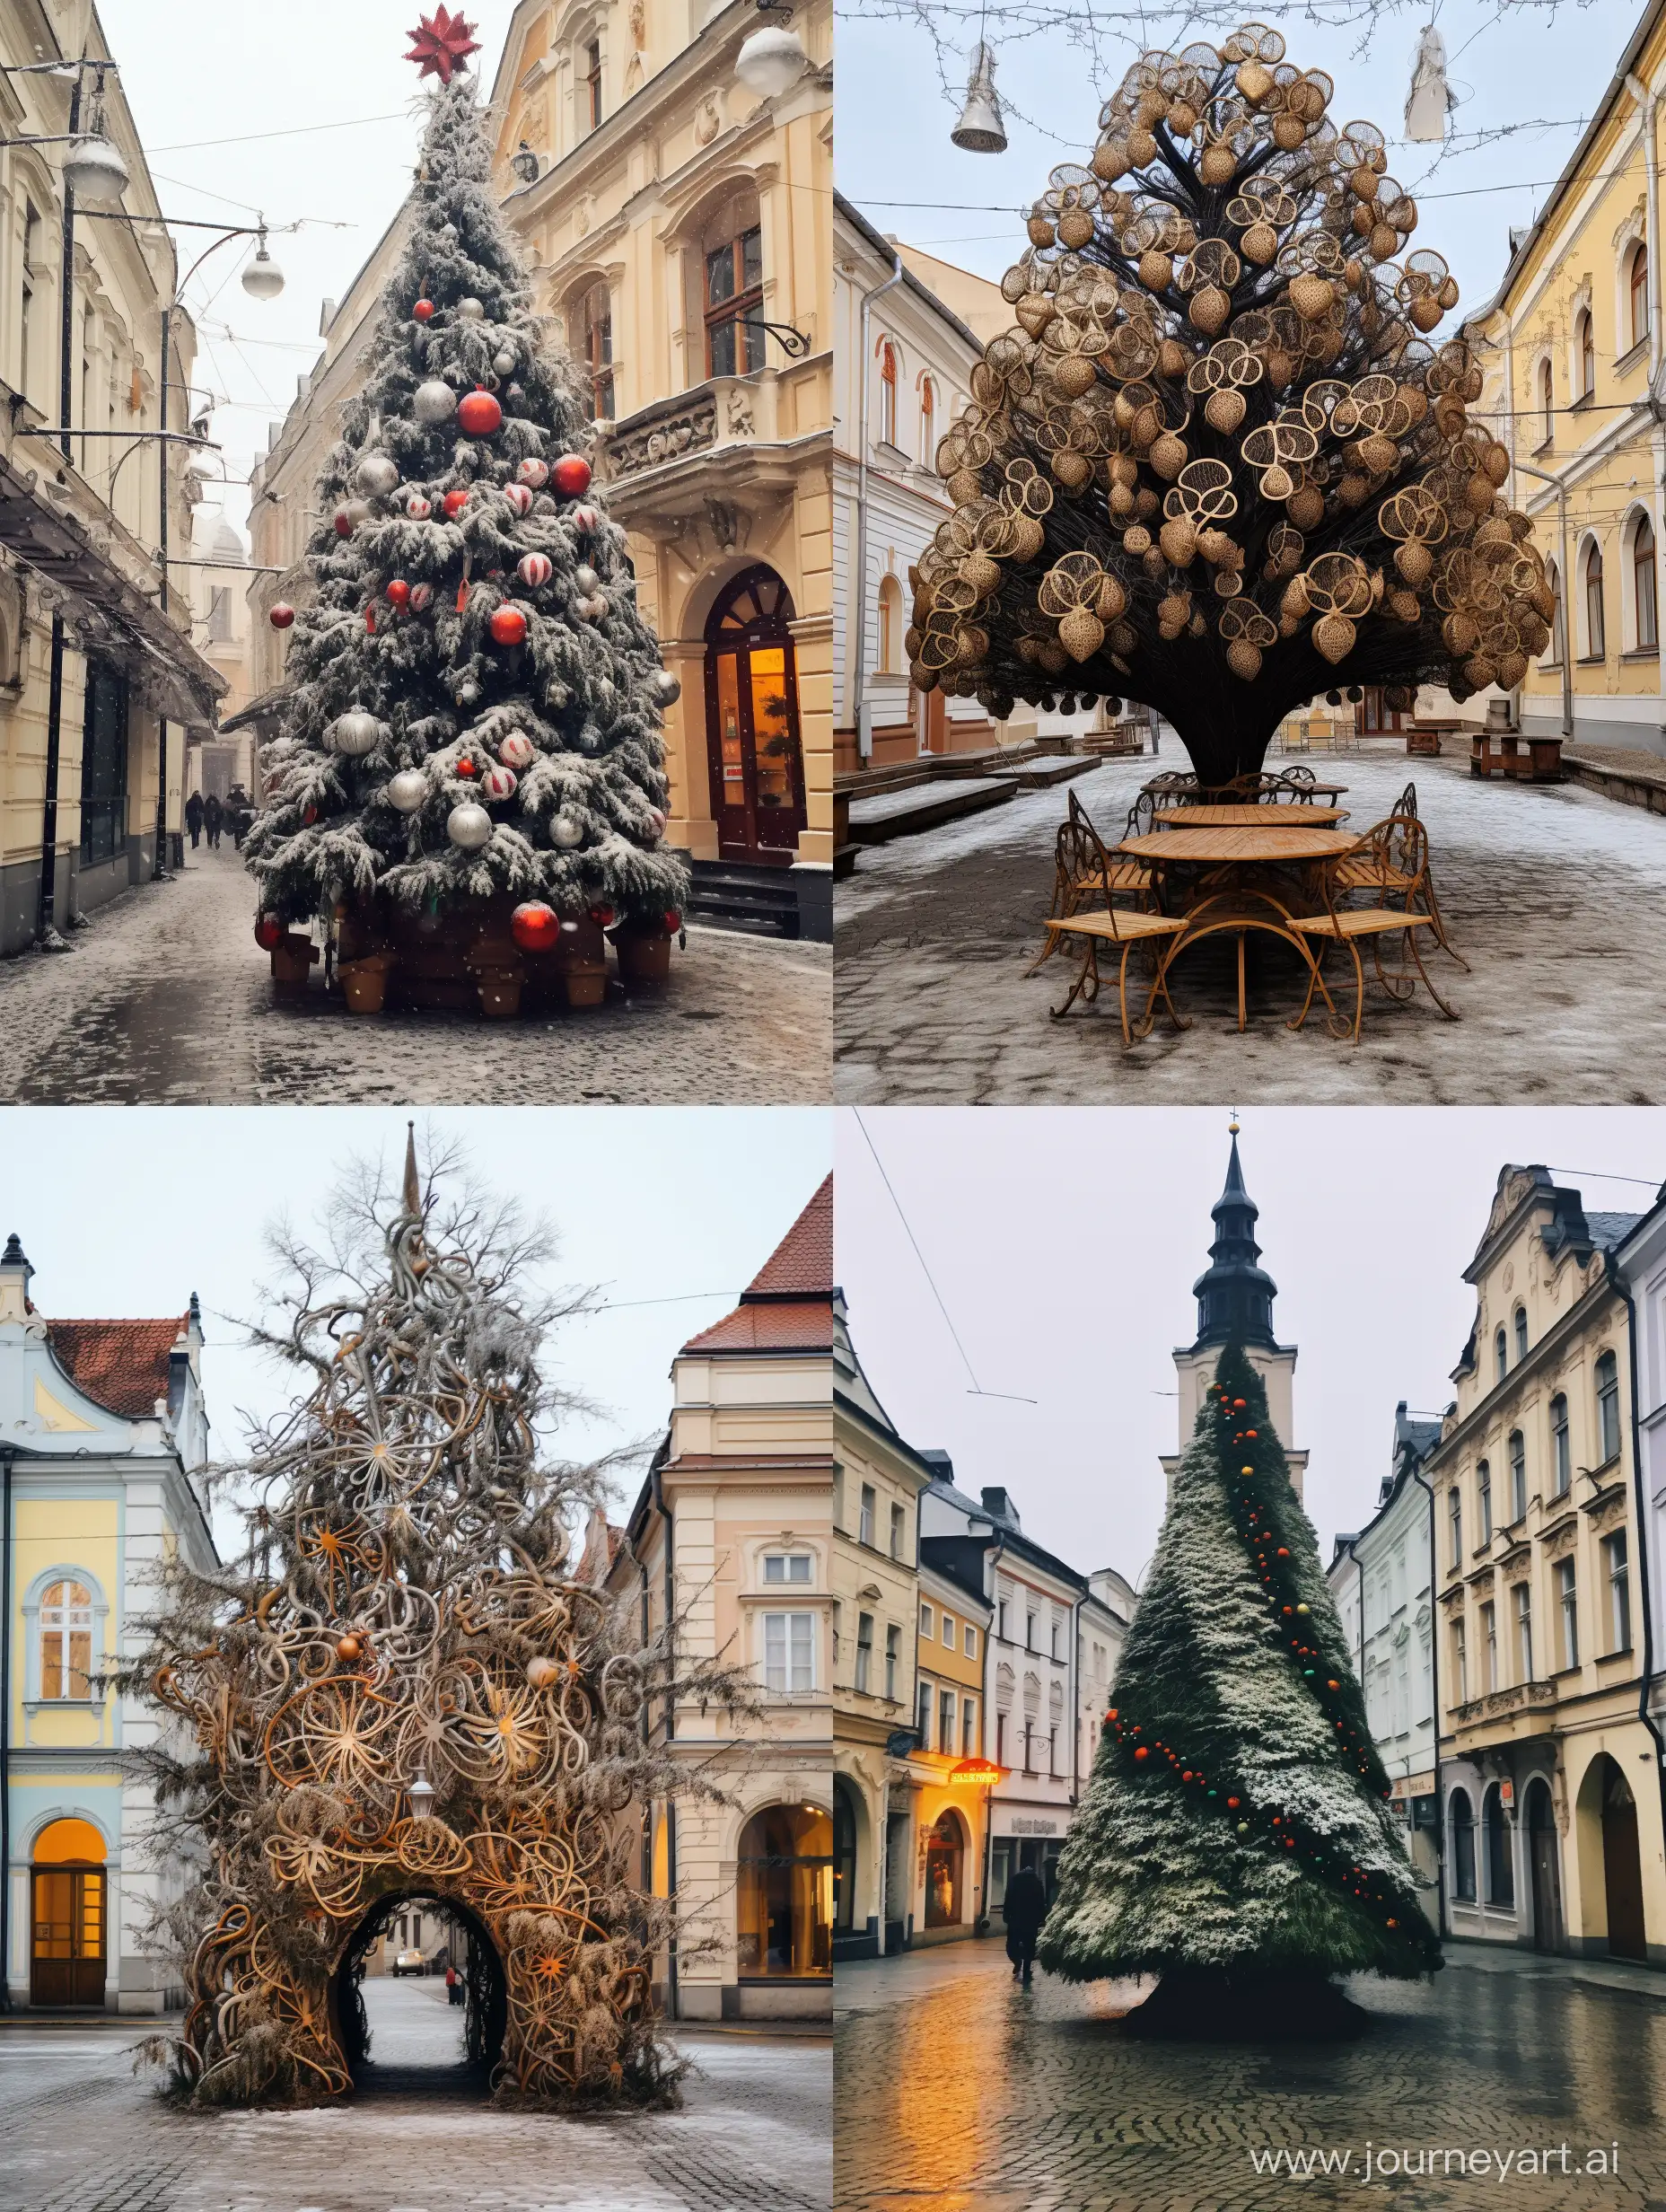 Charming-New-Year-Tree-in-Historic-Old-Town-Setting